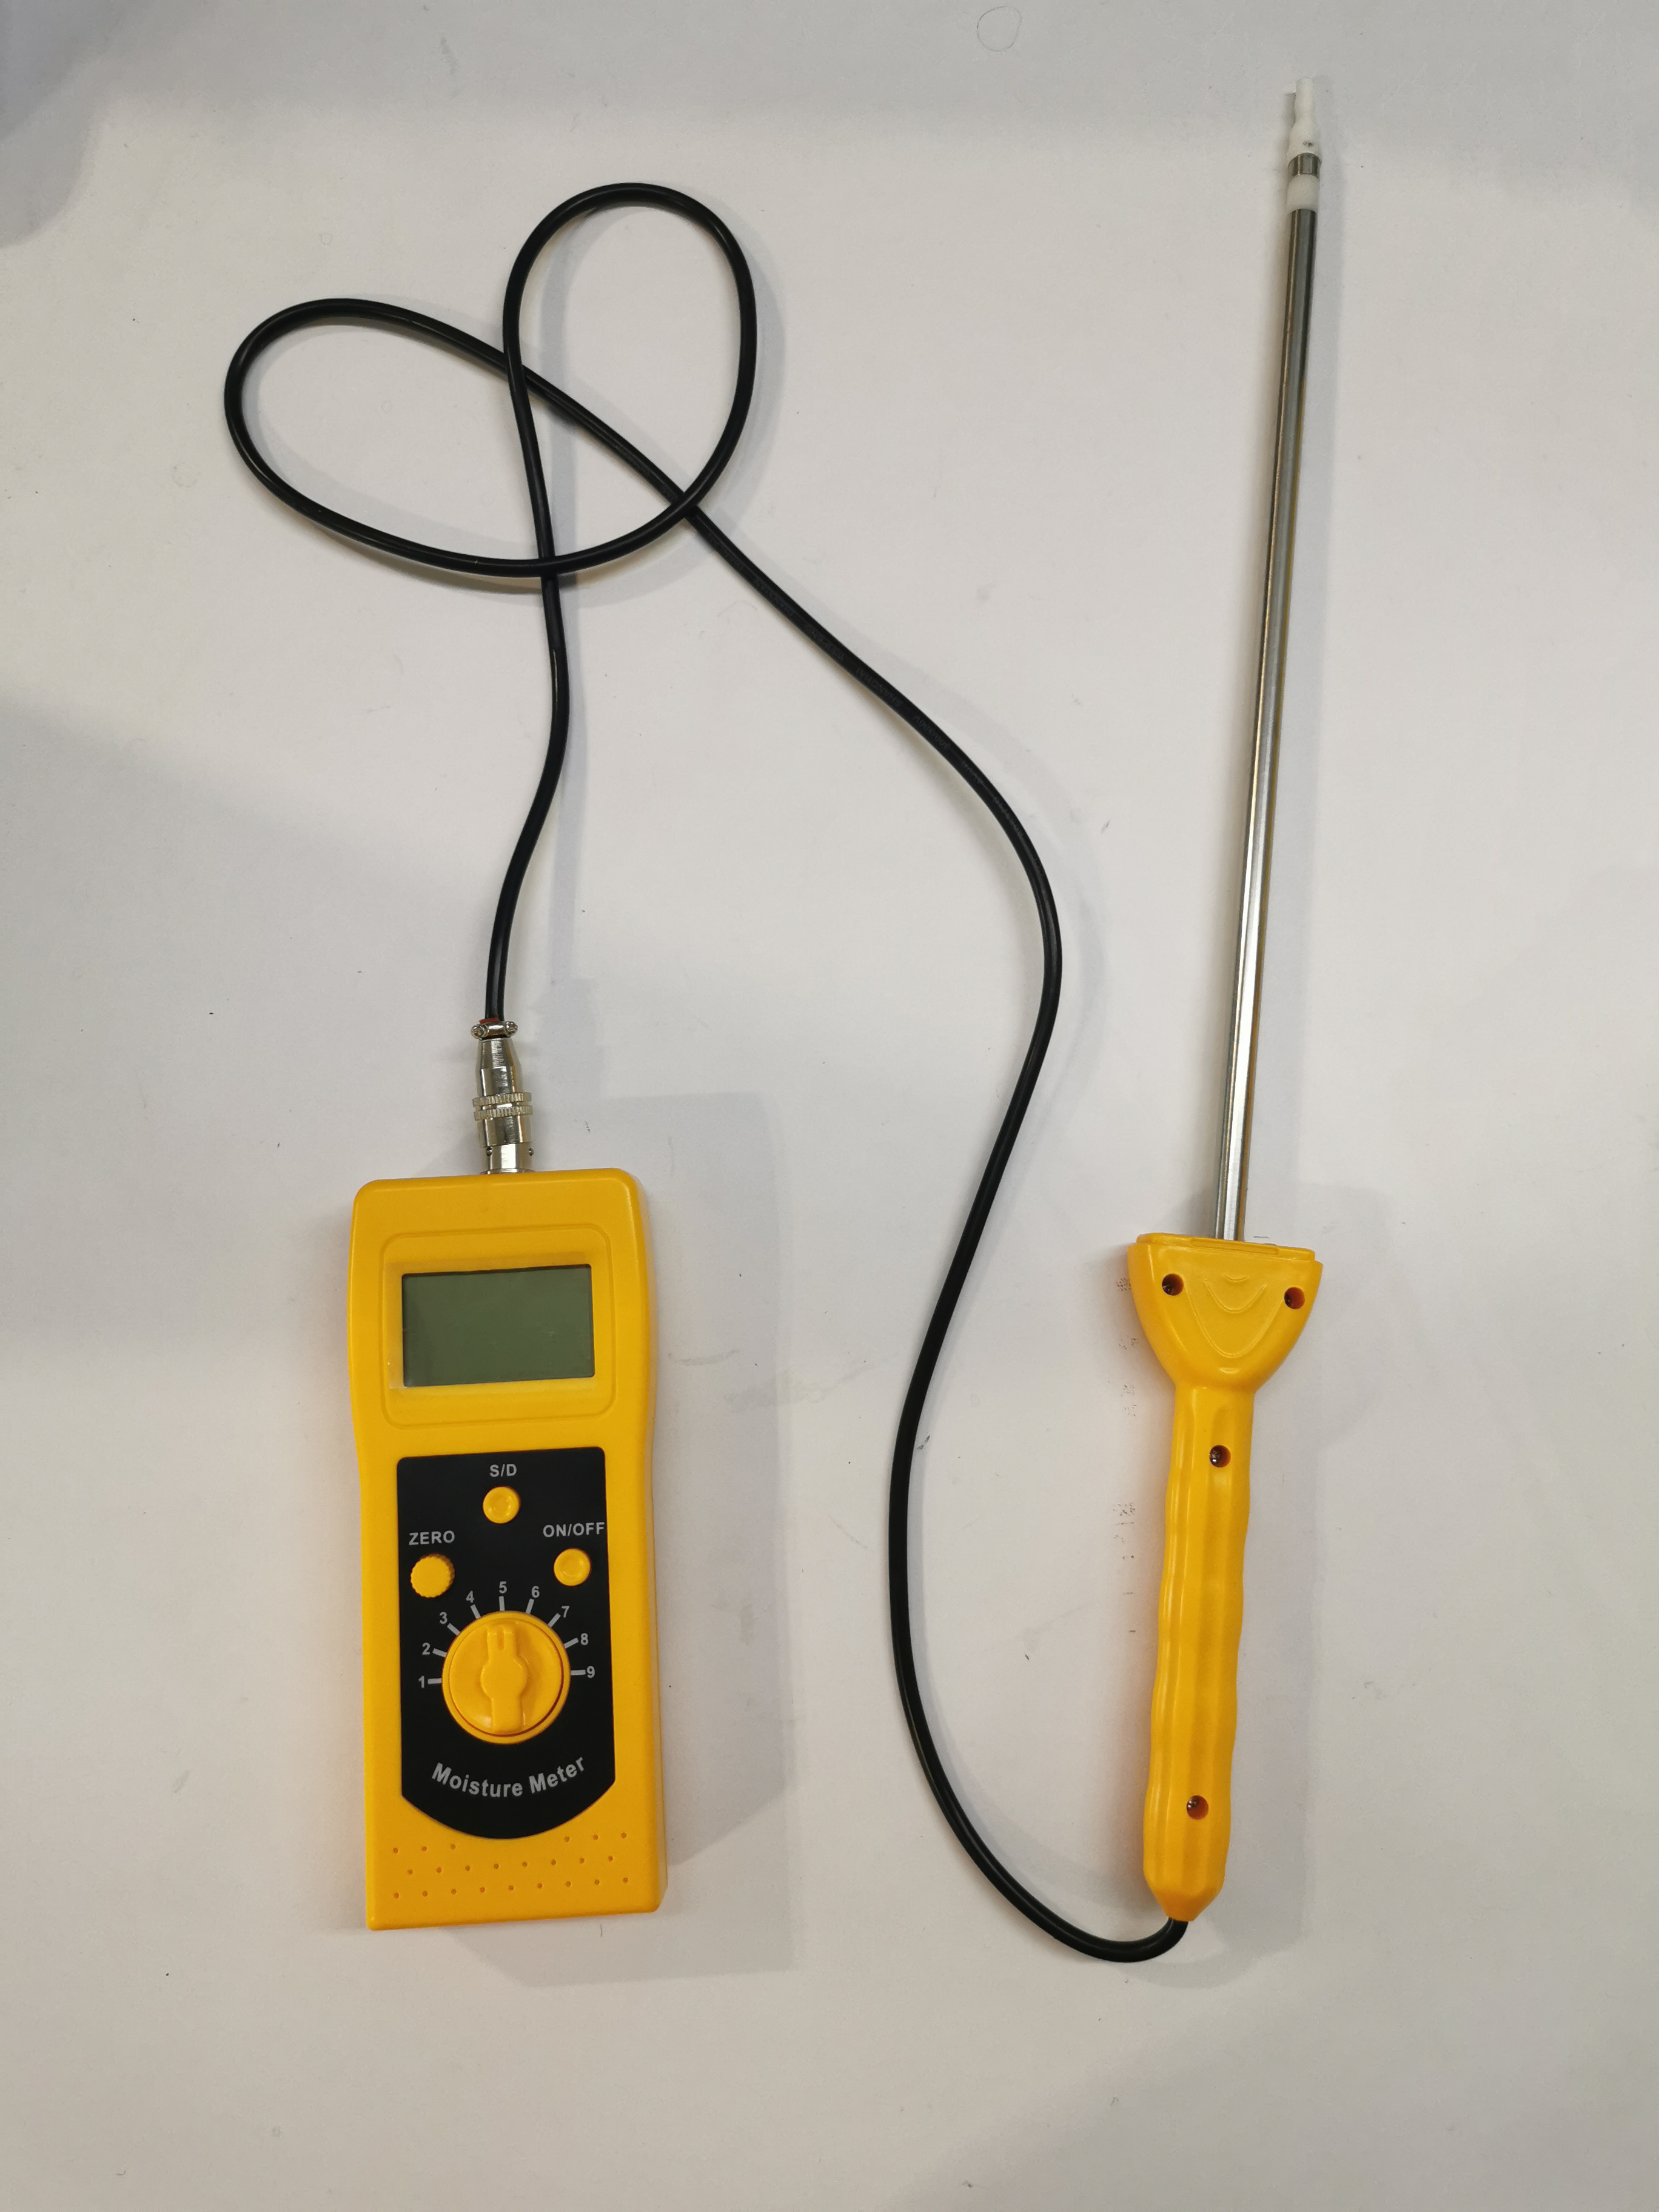 NADE DM400C digital display Portable High-Frequency Moisture Meter for soil, chemical combination powder